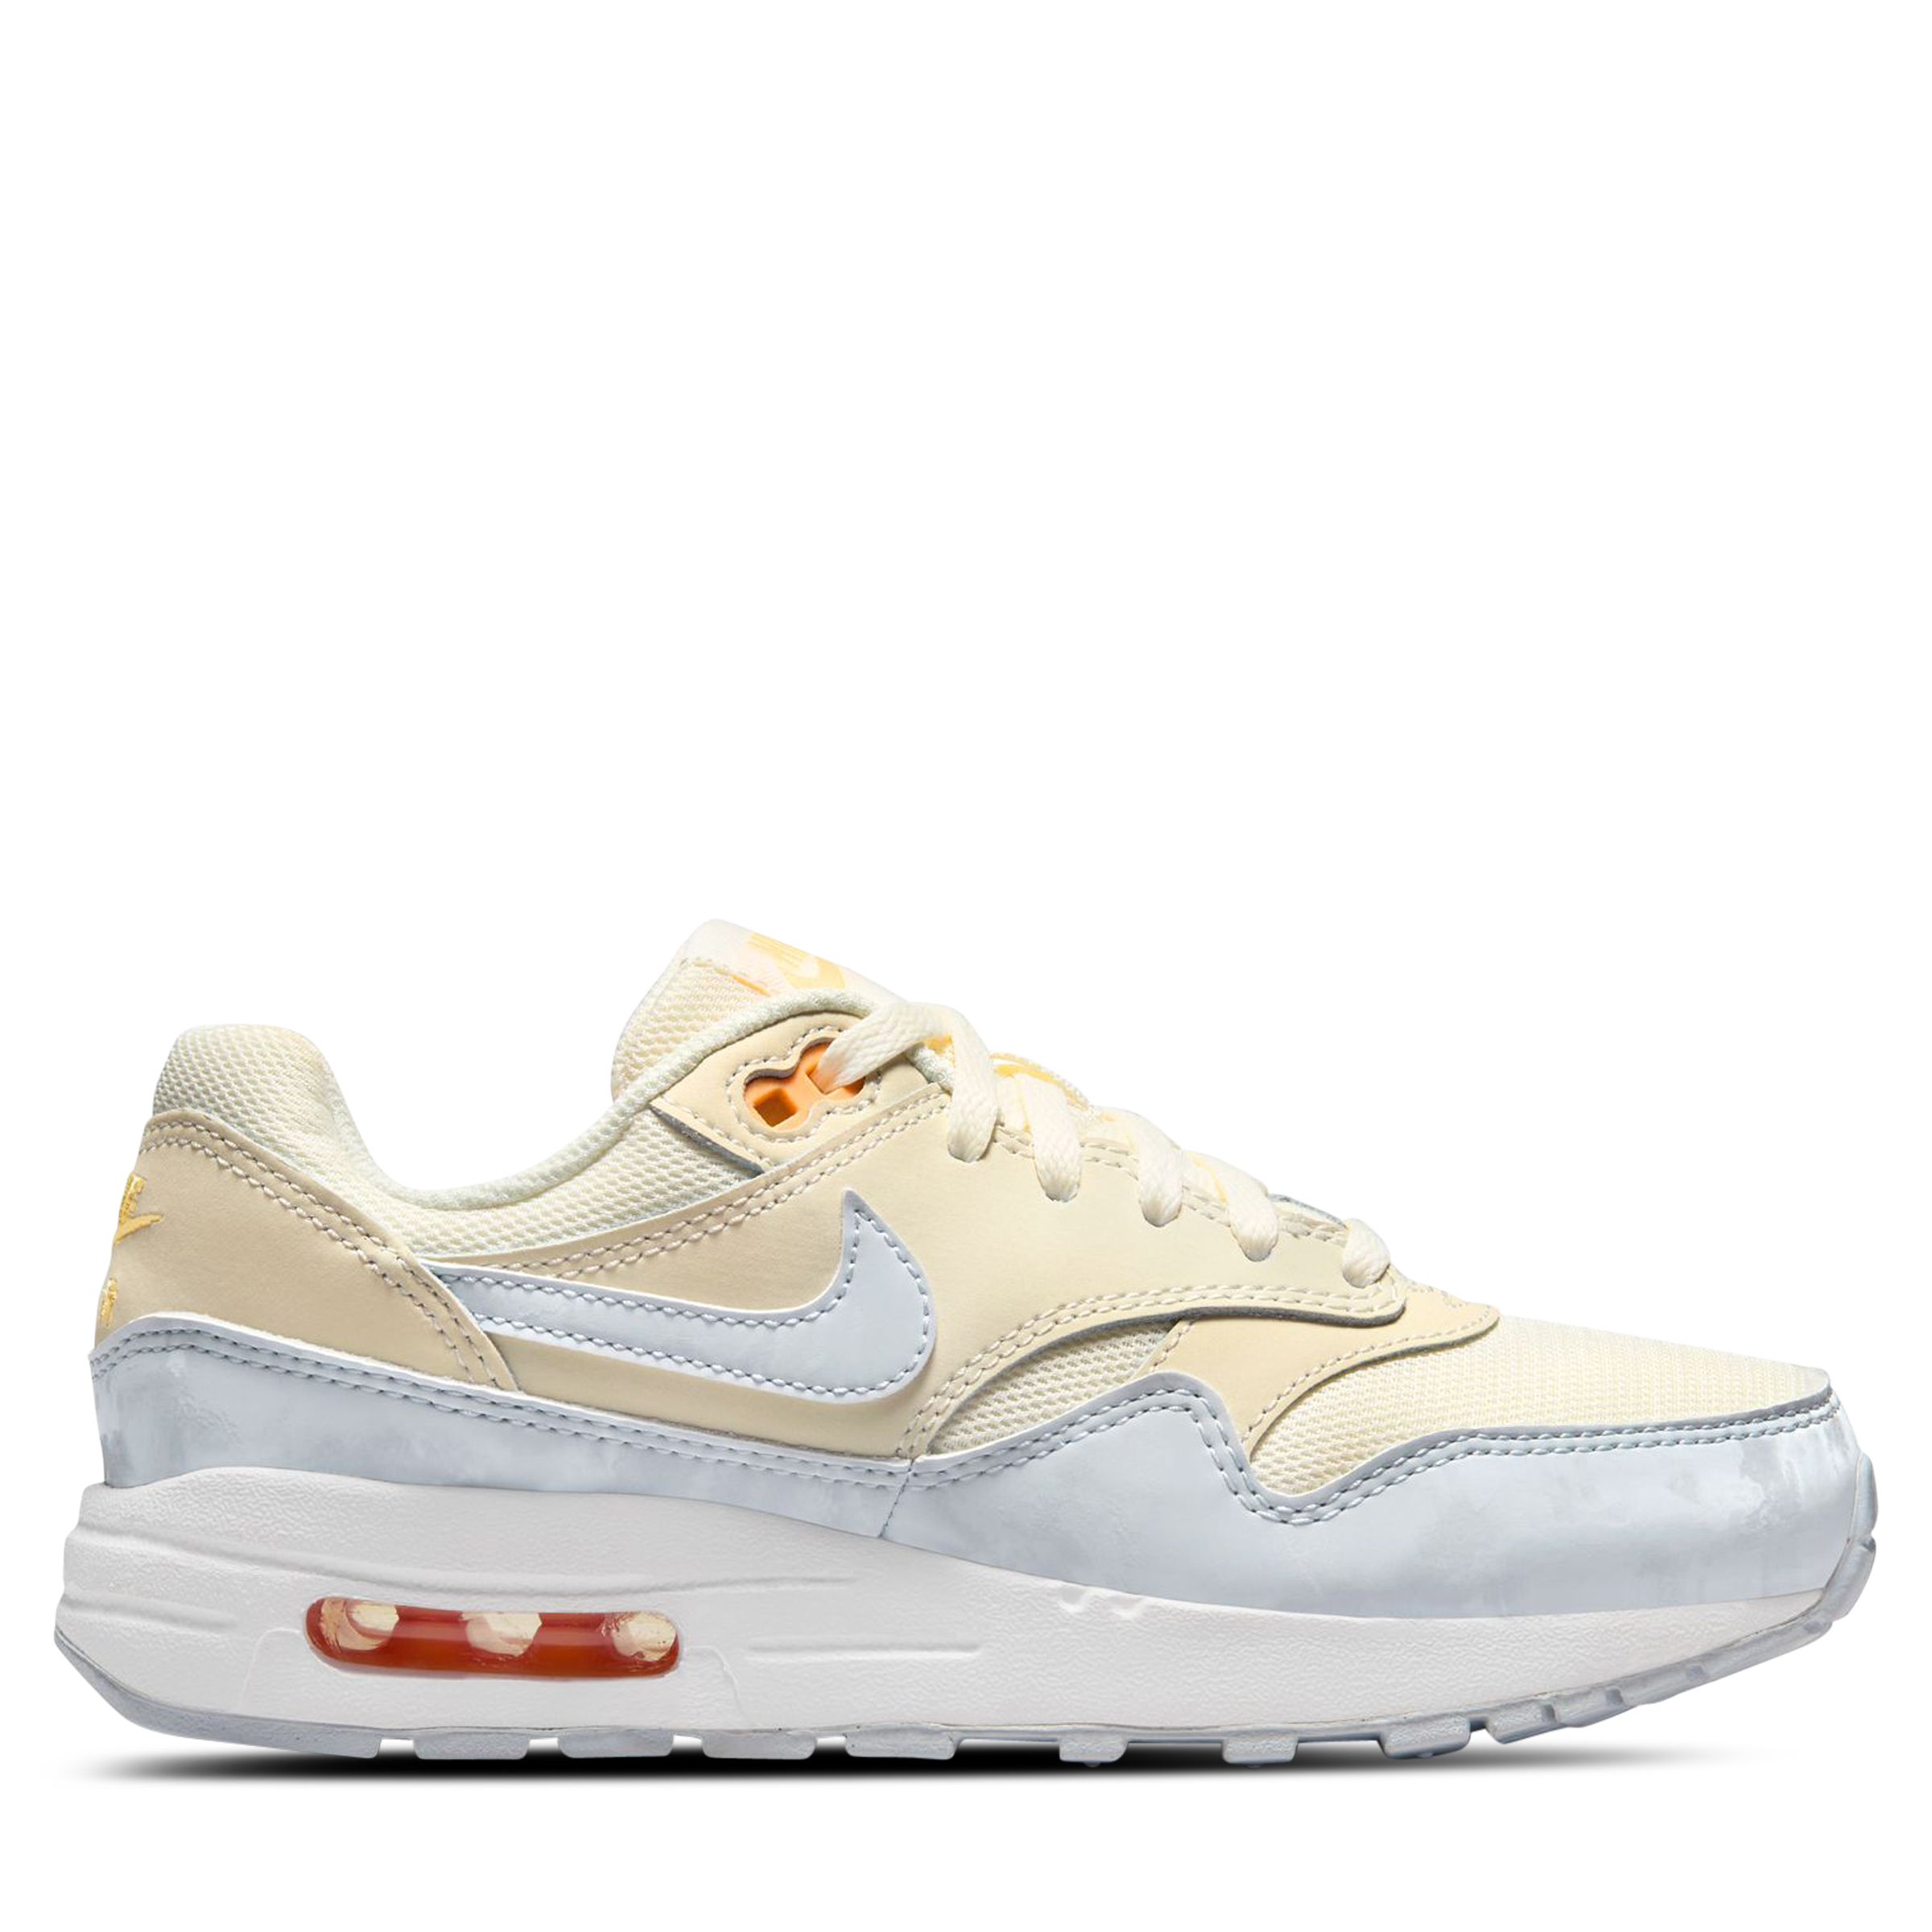 Nike Air Max 1 Youth Pale Ivory/Football Grey/Melon Tint | Hype DC